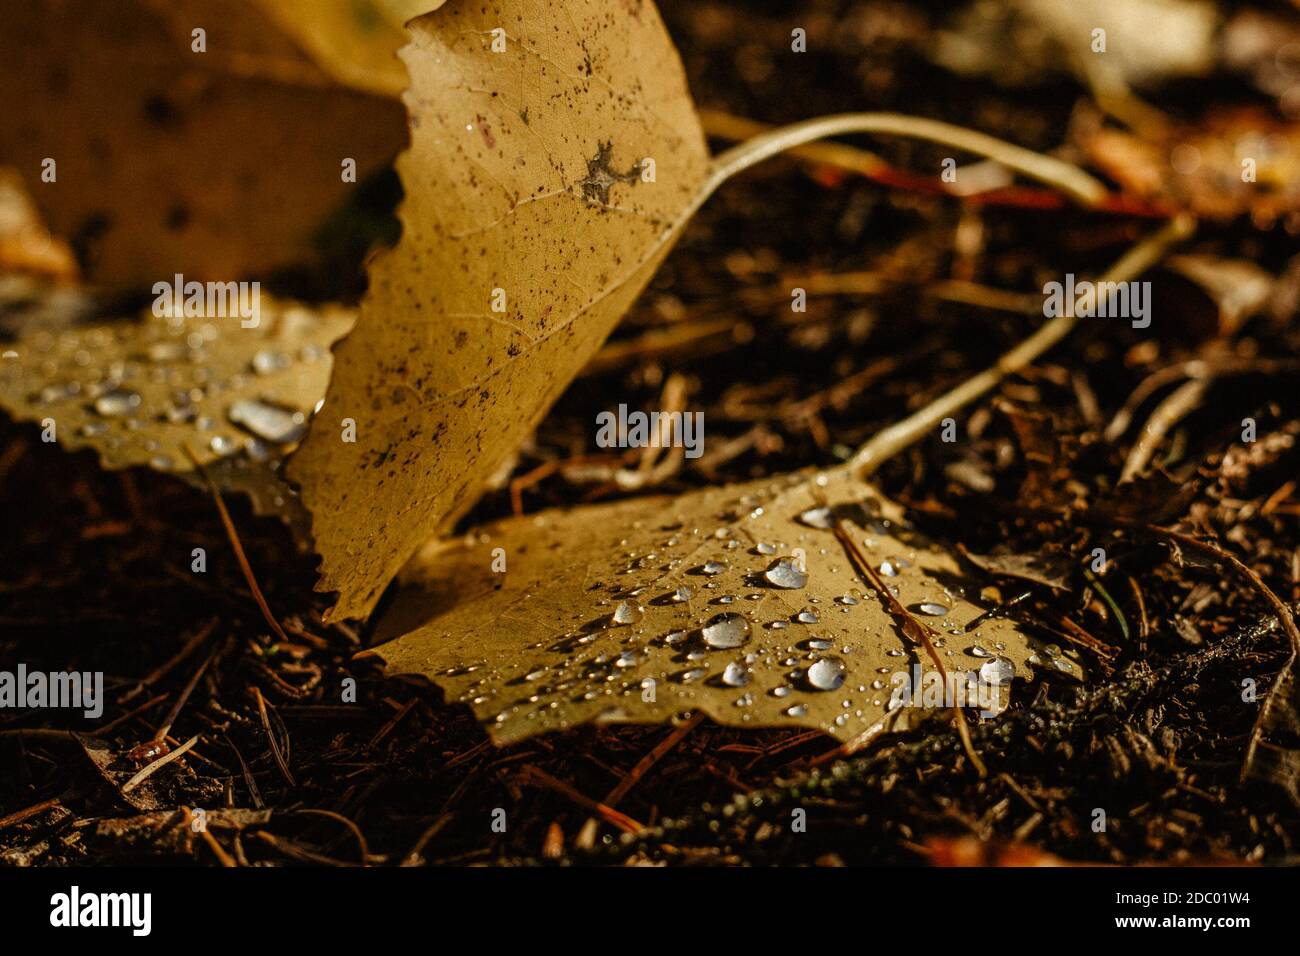 Beautiful drops of transparent rainwater on yellow leaf.Raindrops texture in nature.Rainy weather outdoors.Fall autumn details after the rain Stock Photo